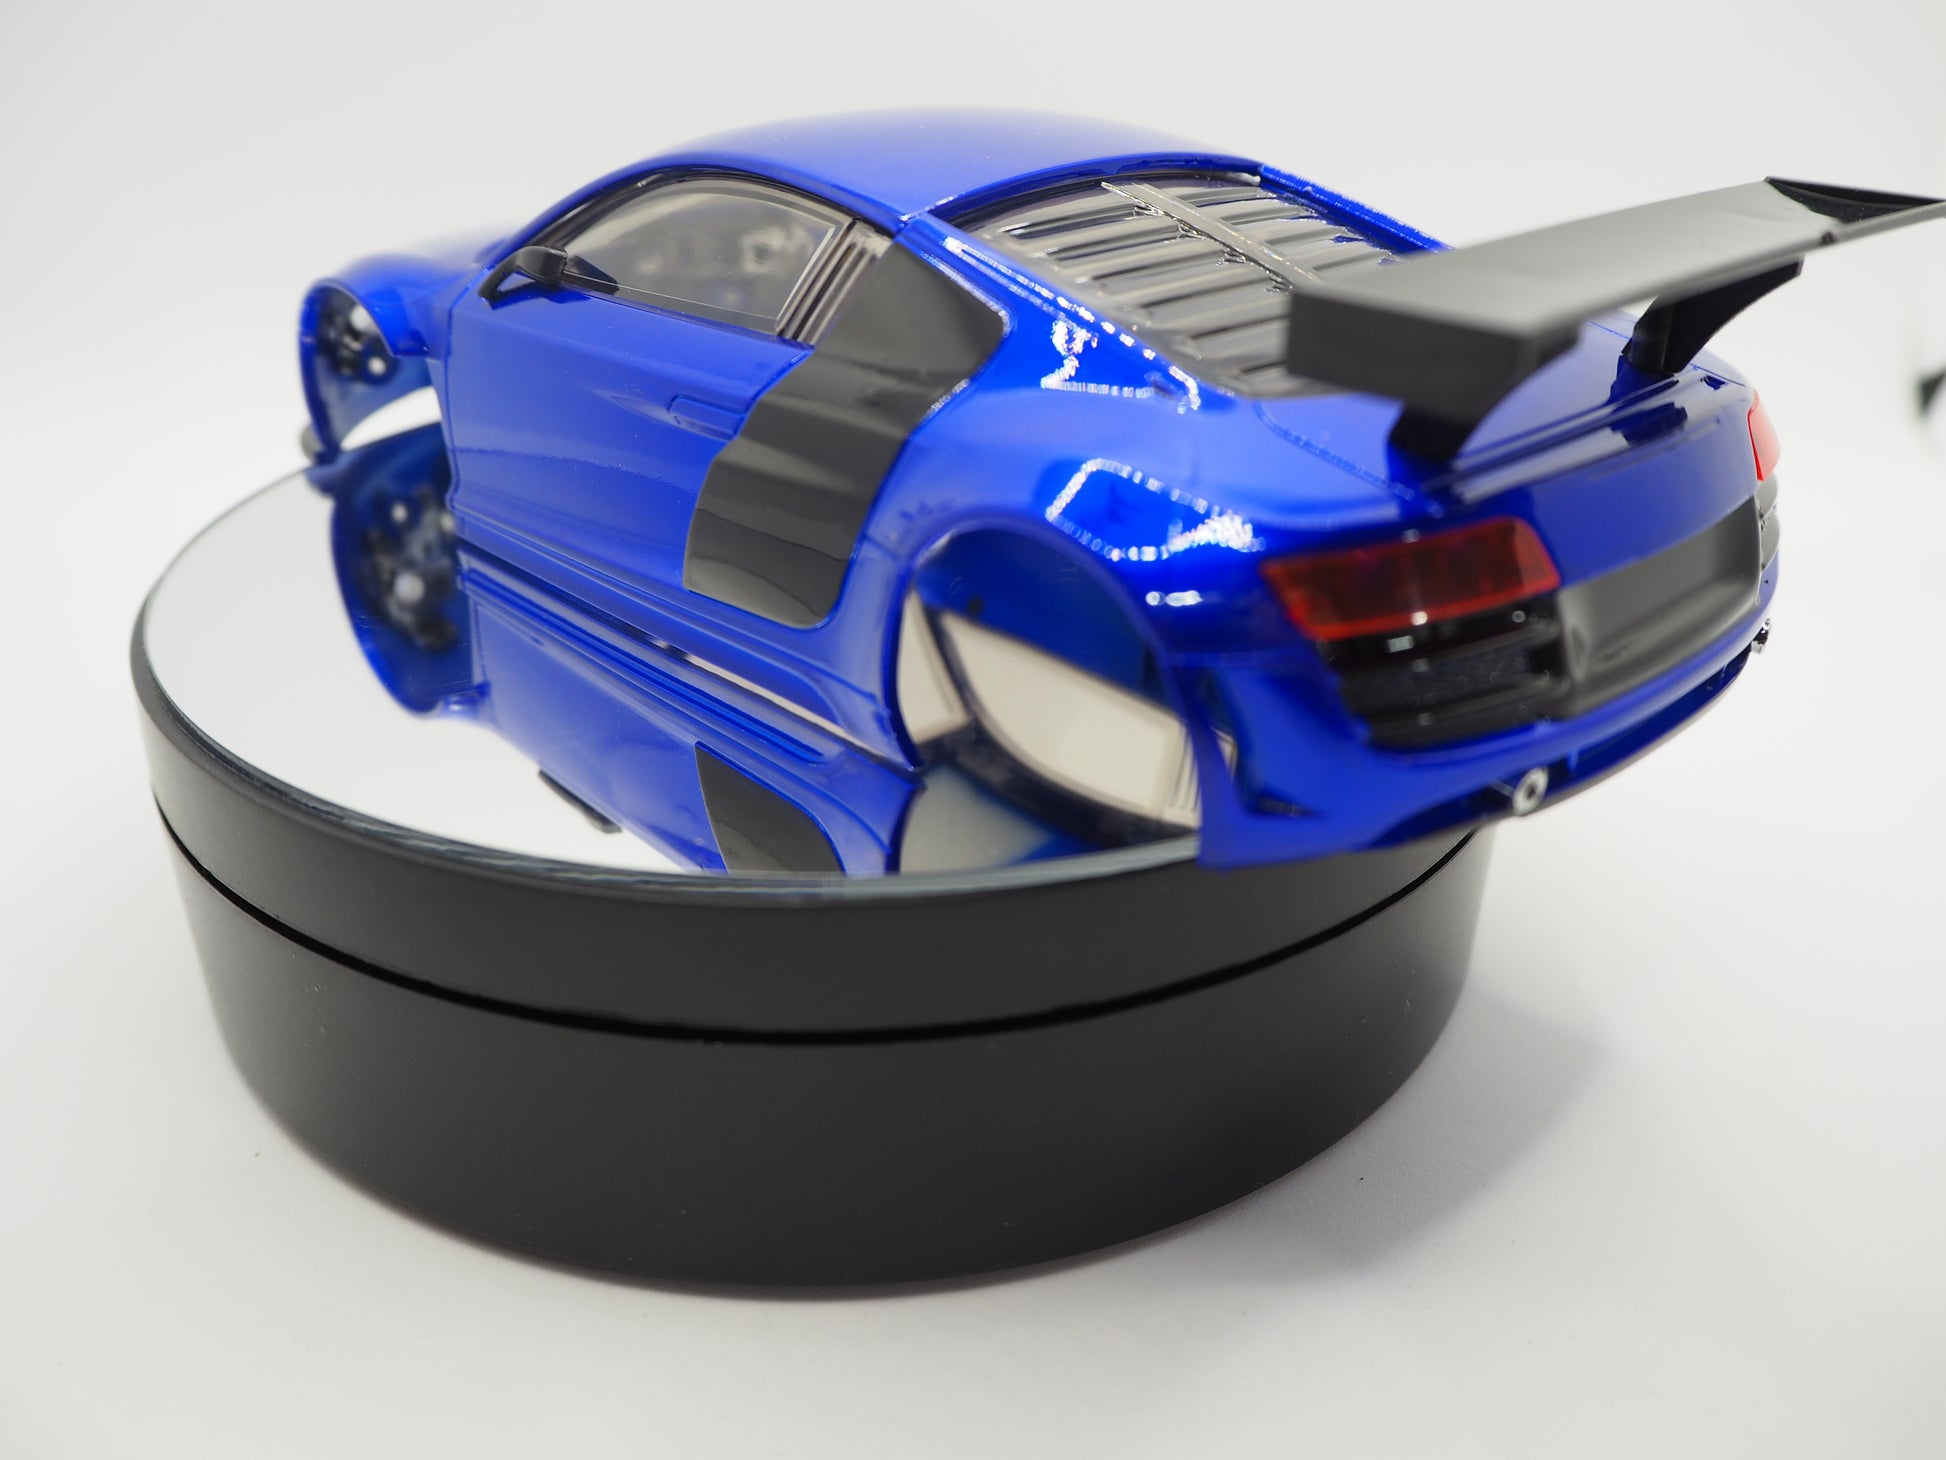 RC car AUDI R8 gets unboxed, tuned and tested! Kyosho Mini-Z! 